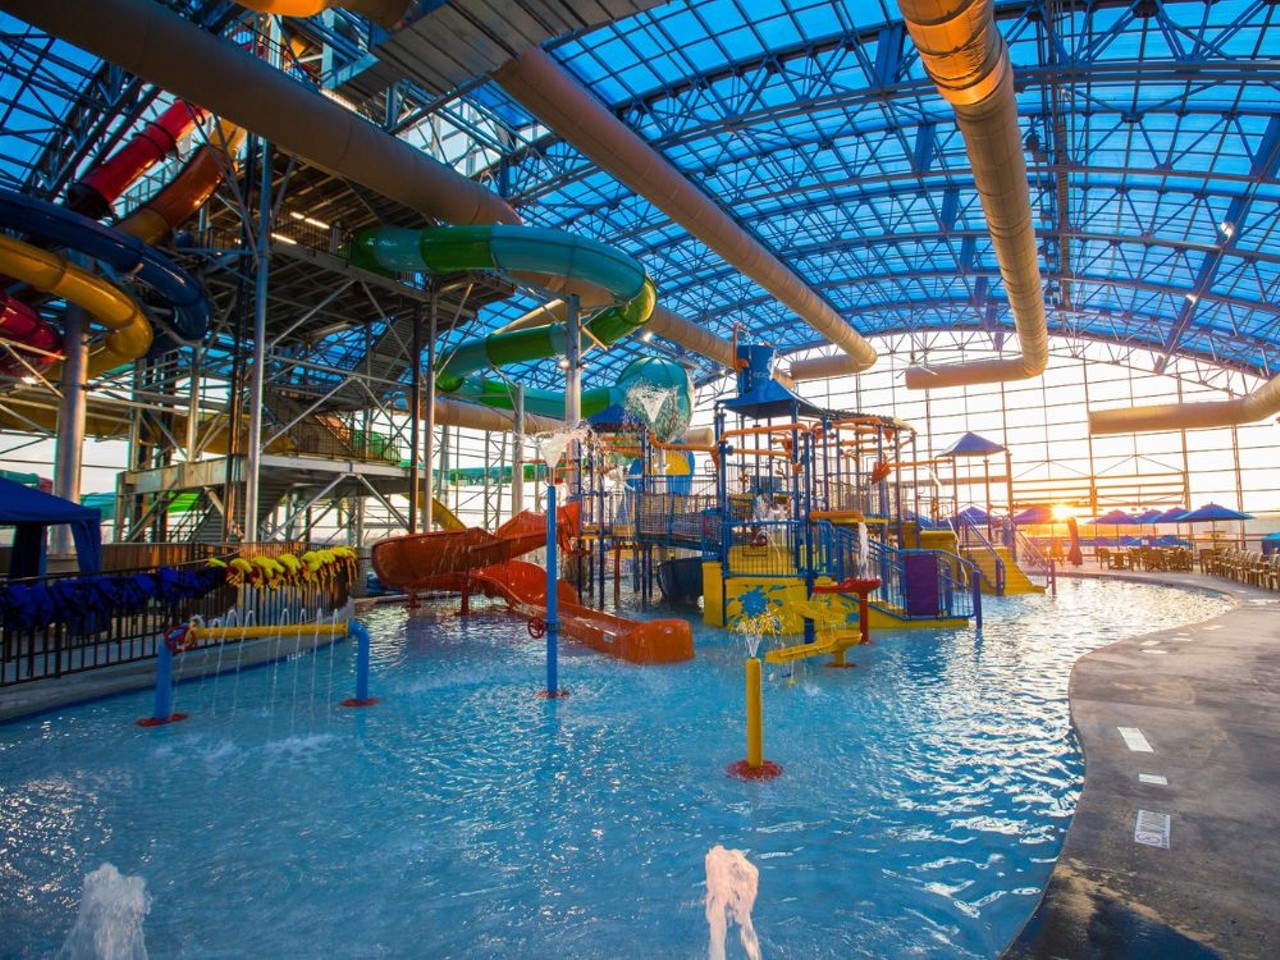 Epic Waters Indoor Waterpark
2970 Epic Place, Grand Prairie,  (972) 337-3131, epicwatersgp.com
This year-round indoor water park in North Texas is worth a road trip. The 80,000-square-foot attraction features thrilling rides like the Texas Twist slide and Yellowjacket Drop, plus more relaxed fun on a lazy river and the kid-friendly Rascal’s Round Up play area.